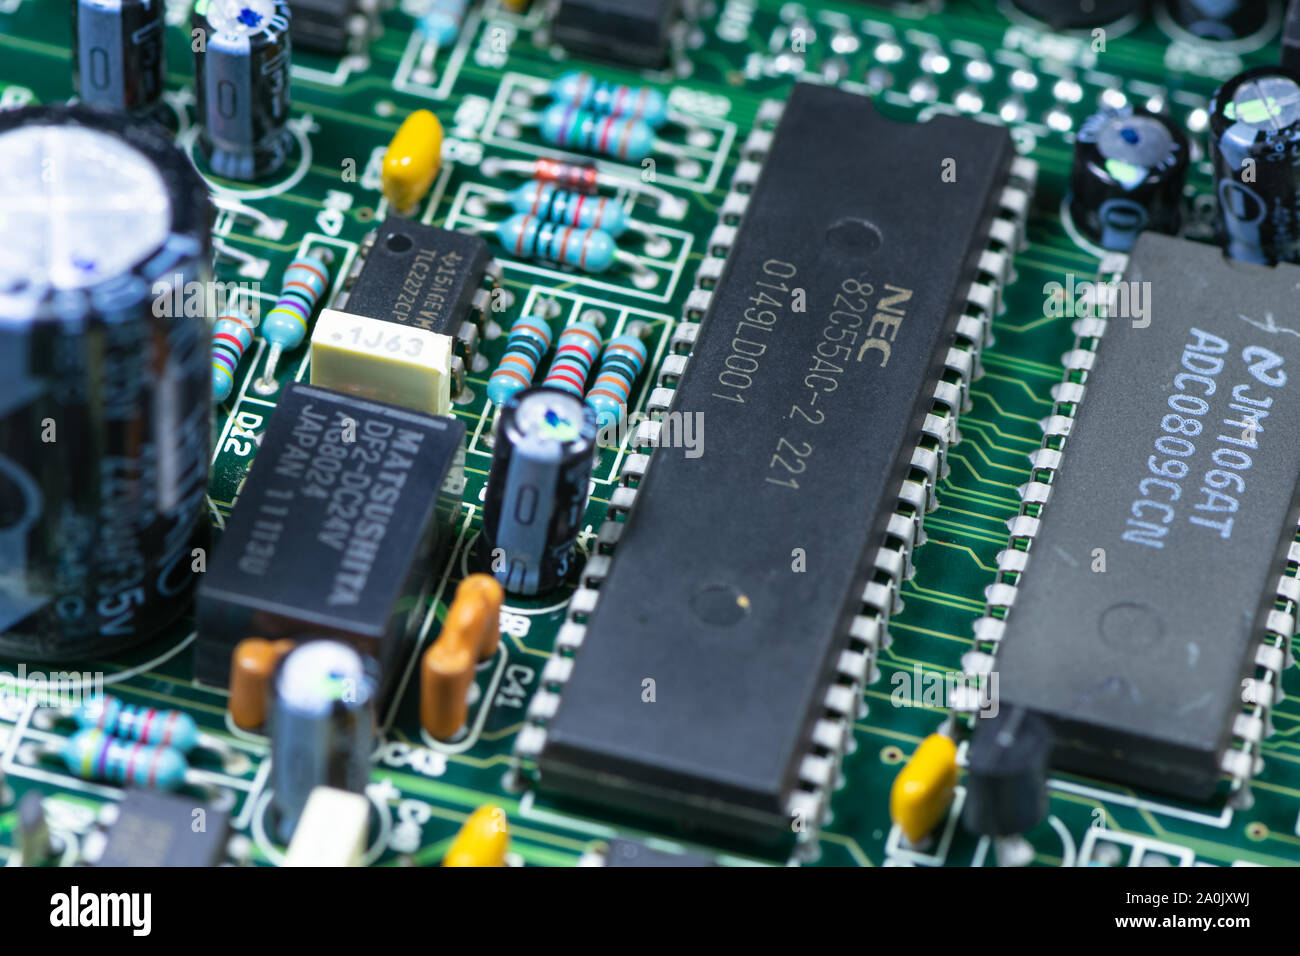 Close up shot of PCB unit with visible resistors, capacitors and micro procesors. Stock Photo